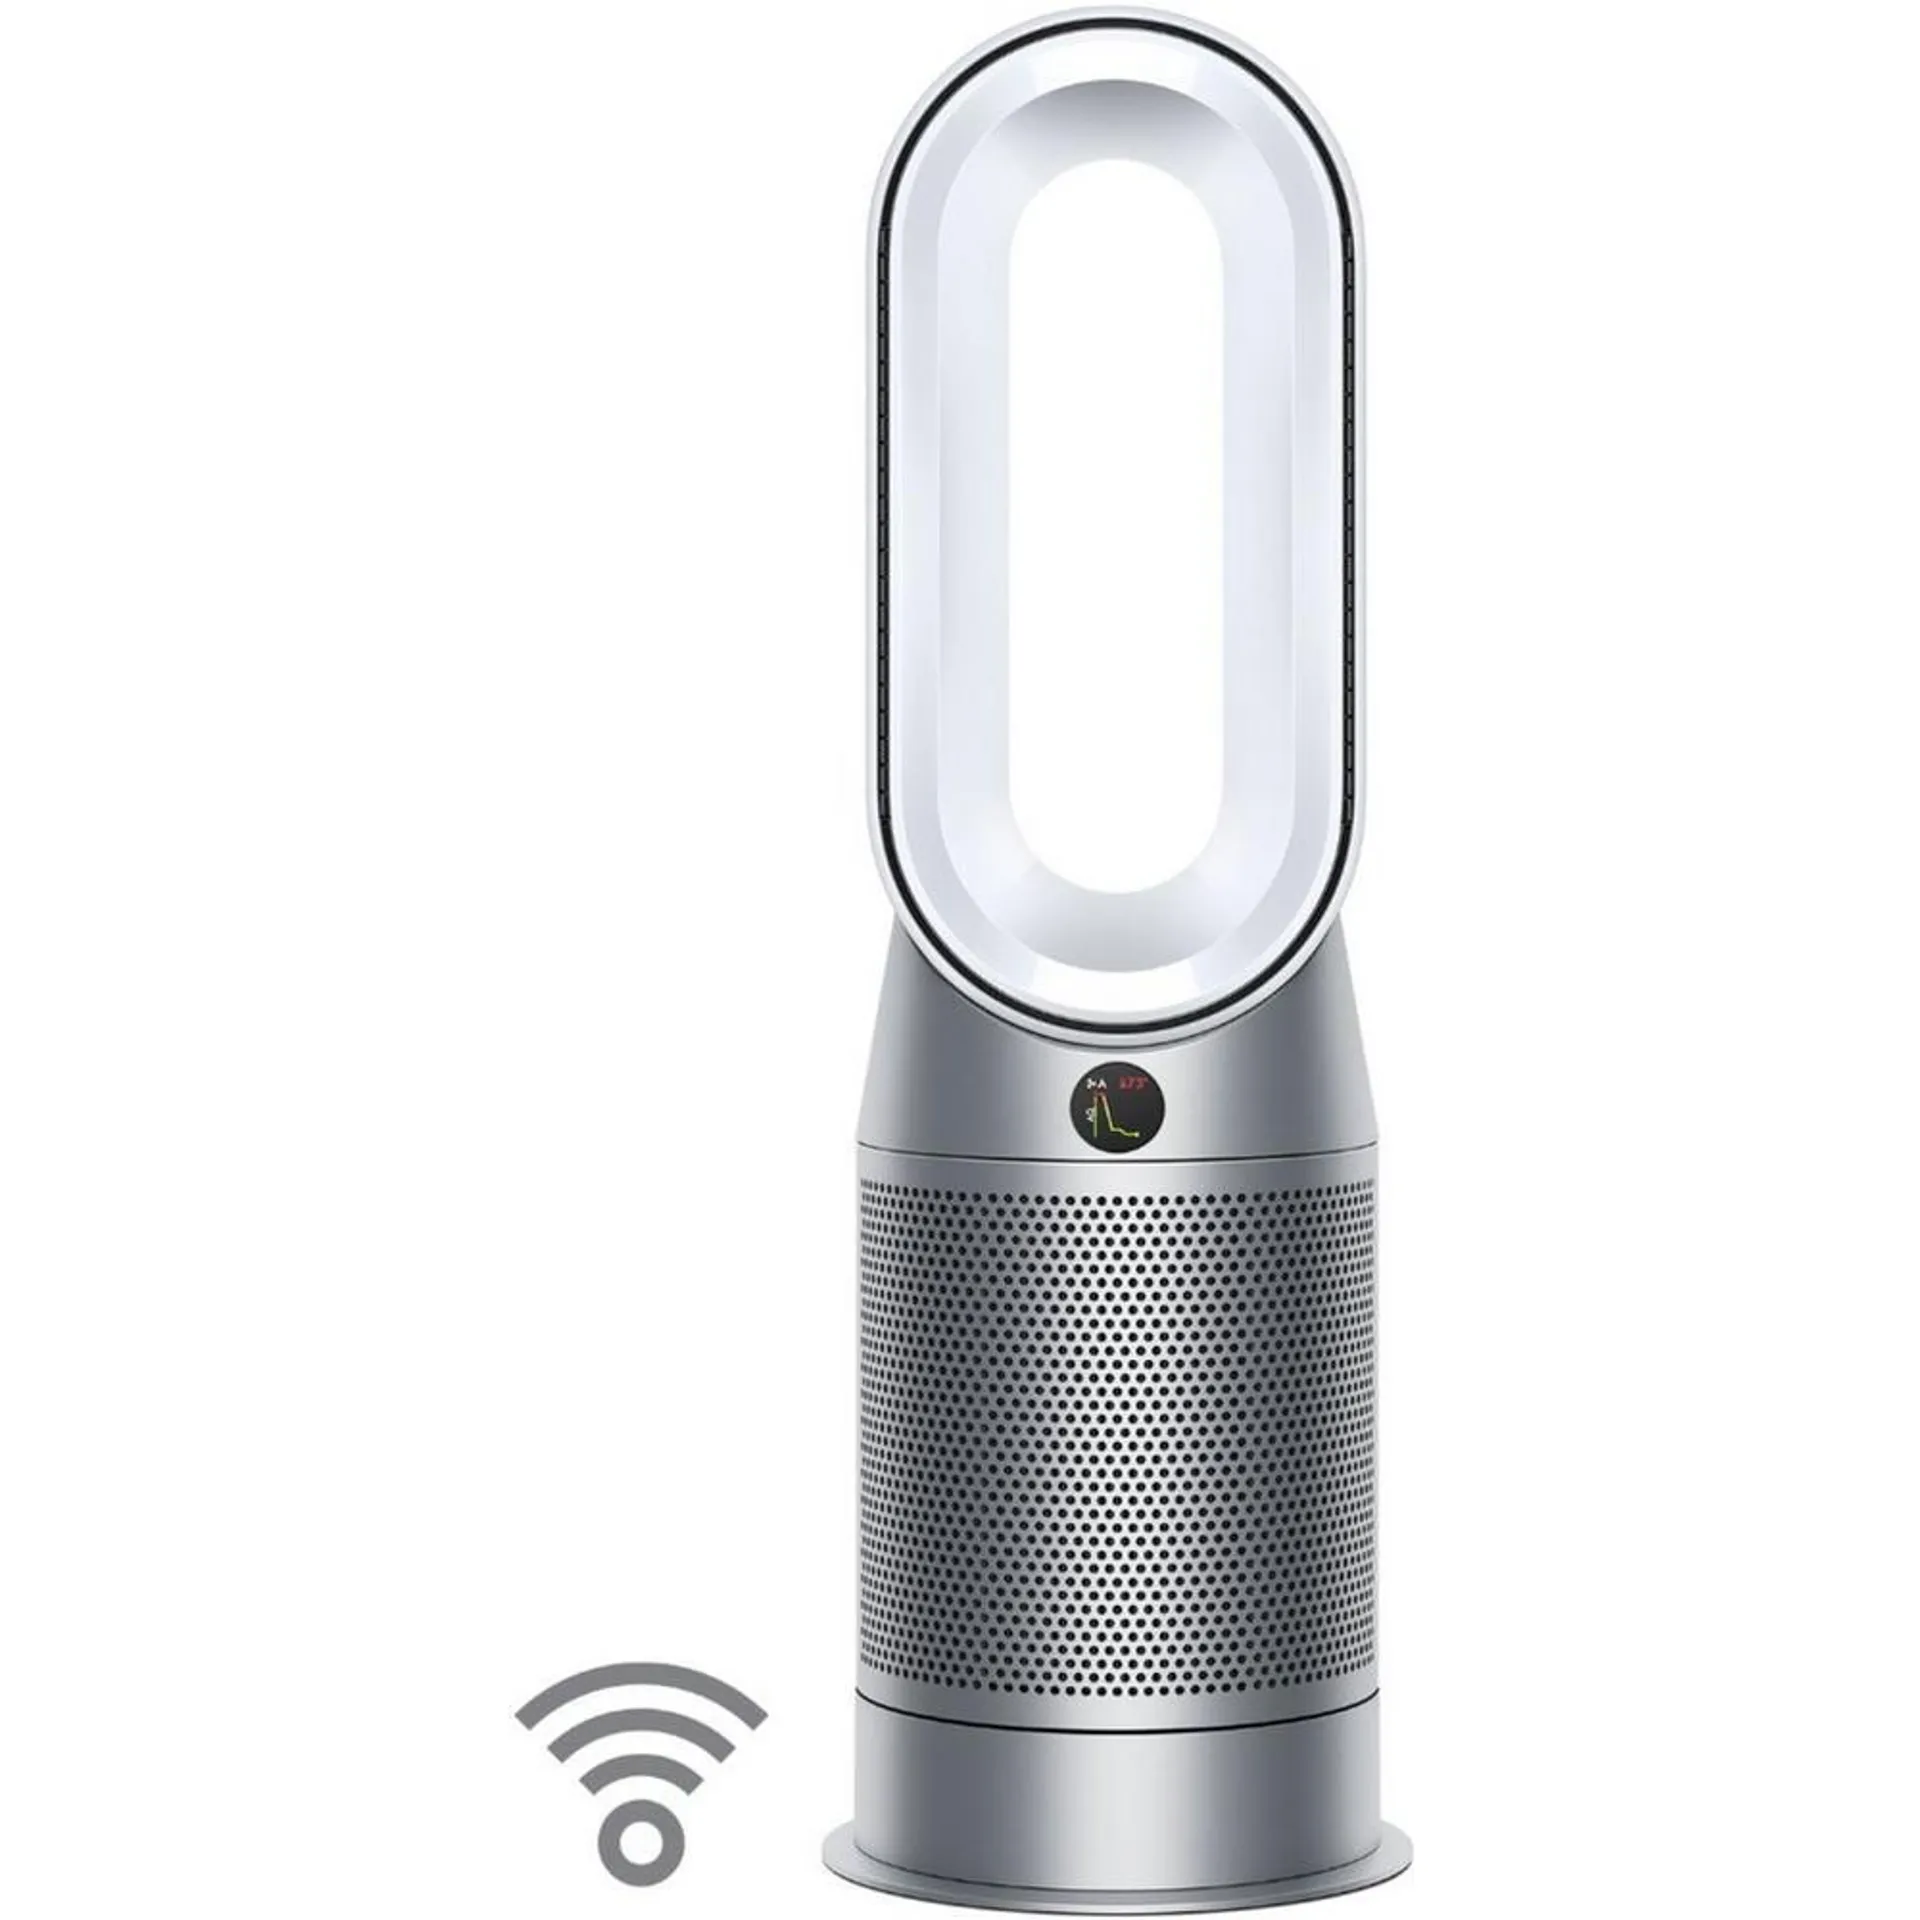 Purifier Hot+Cool - HP07 - Smart Tower Air Purifier, Heater and Fan - White/Silver